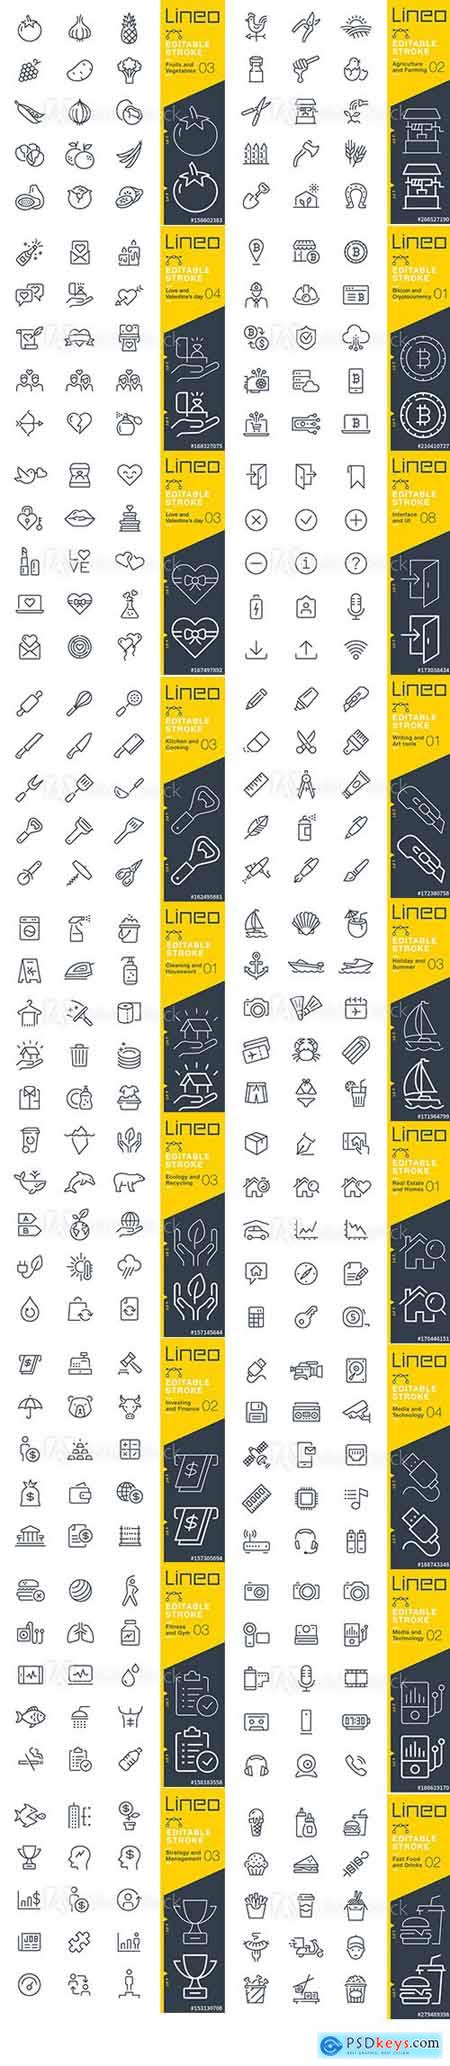 Vector Set - Outline Icons Pack Lineo Vol 2